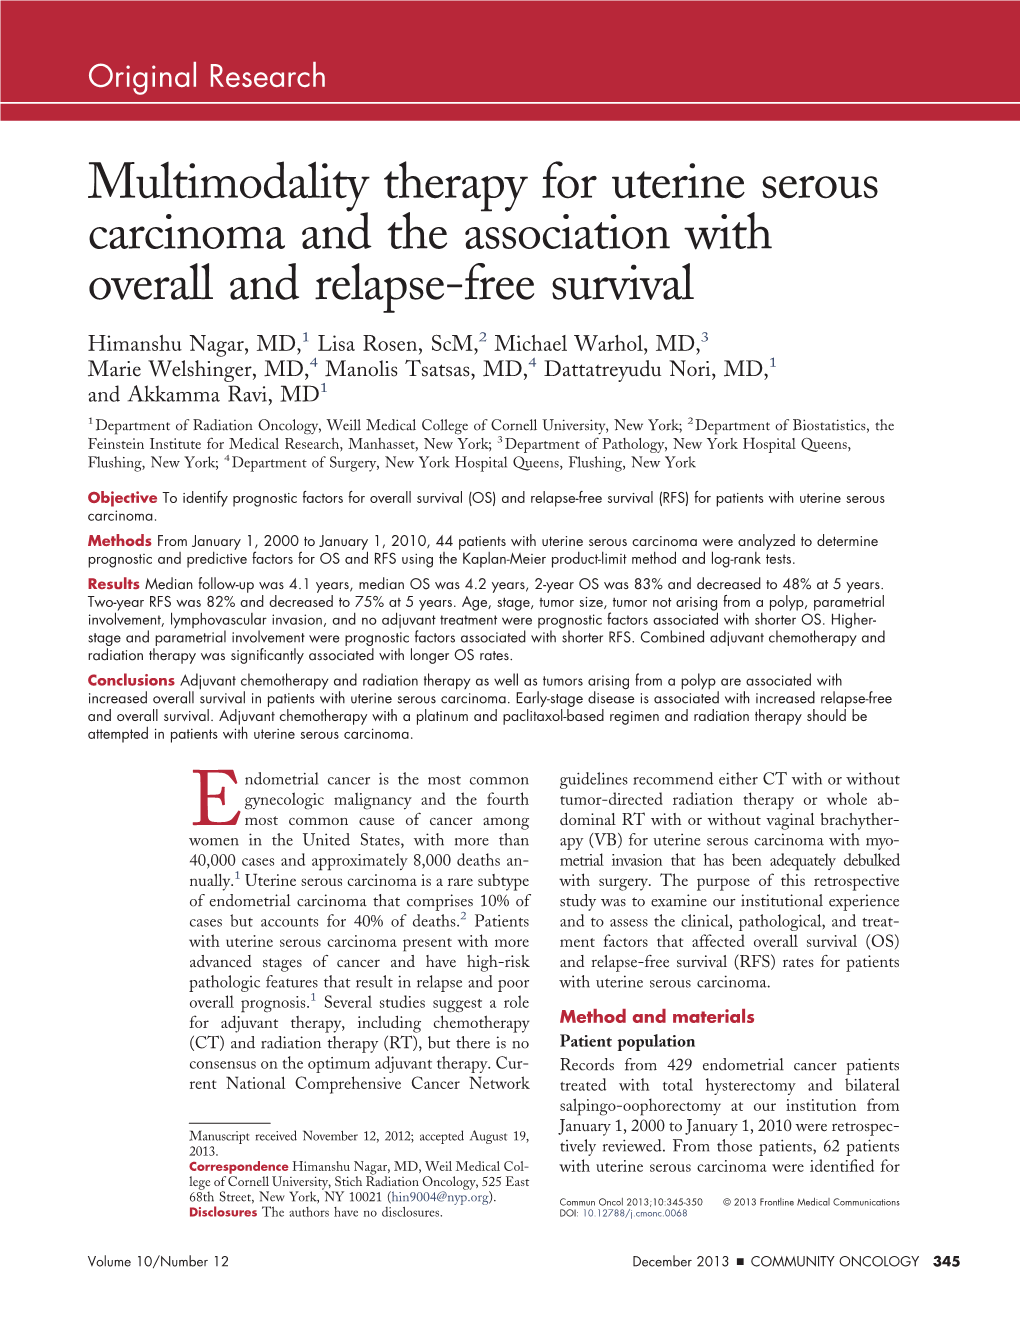 Multimodality Therapy for Uterine Serous Carcinoma and The